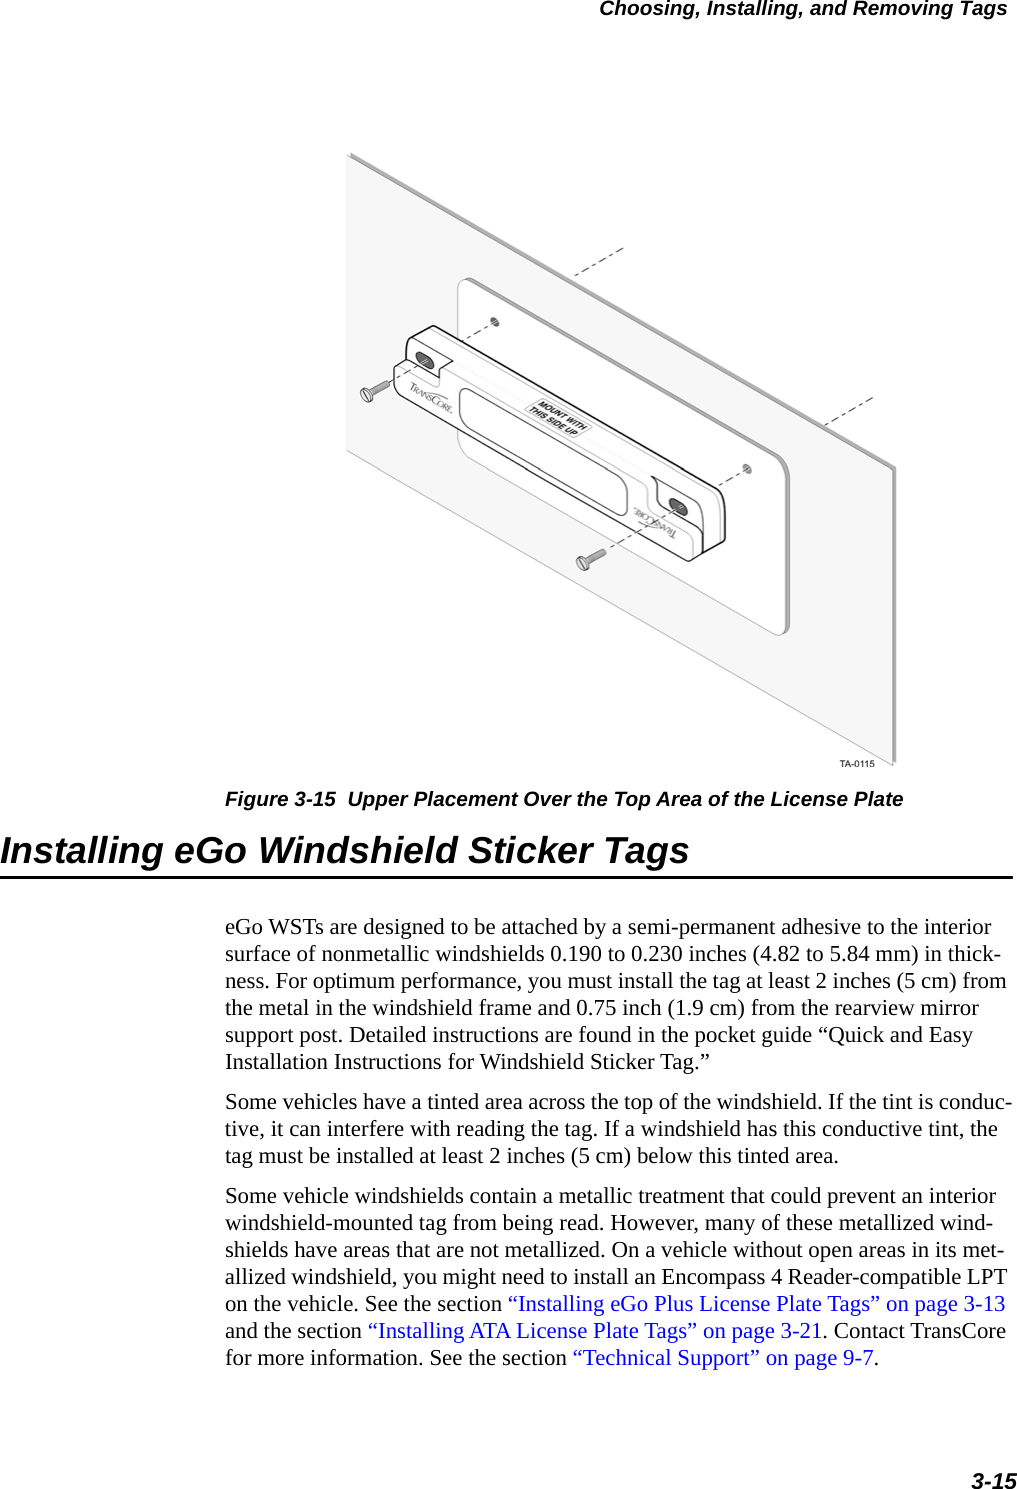 Choosing, Installing, and Removing Tags3-15Figure 3-15  Upper Placement Over the Top Area of the License PlateInstalling eGo Windshield Sticker TagseGo WSTs are designed to be attached by a semi-permanent adhesive to the interior surface of nonmetallic windshields 0.190 to 0.230 inches (4.82 to 5.84 mm) in thick-ness. For optimum performance, you must install the tag at least 2 inches (5 cm) from the metal in the windshield frame and 0.75 inch (1.9 cm) from the rearview mirror support post. Detailed instructions are found in the pocket guide “Quick and Easy Installation Instructions for Windshield Sticker Tag.”Some vehicles have a tinted area across the top of the windshield. If the tint is conduc-tive, it can interfere with reading the tag. If a windshield has this conductive tint, the tag must be installed at least 2 inches (5 cm) below this tinted area.Some vehicle windshields contain a metallic treatment that could prevent an interior windshield-mounted tag from being read. However, many of these metallized wind-shields have areas that are not metallized. On a vehicle without open areas in its met-allized windshield, you might need to install an Encompass 4 Reader-compatible LPT on the vehicle. See the section “Installing eGo Plus License Plate Tags” on page 3-13 and the section “Installing ATA License Plate Tags” on page 3-21. Contact TransCore for more information. See the section “Technical Support” on page 9-7. 